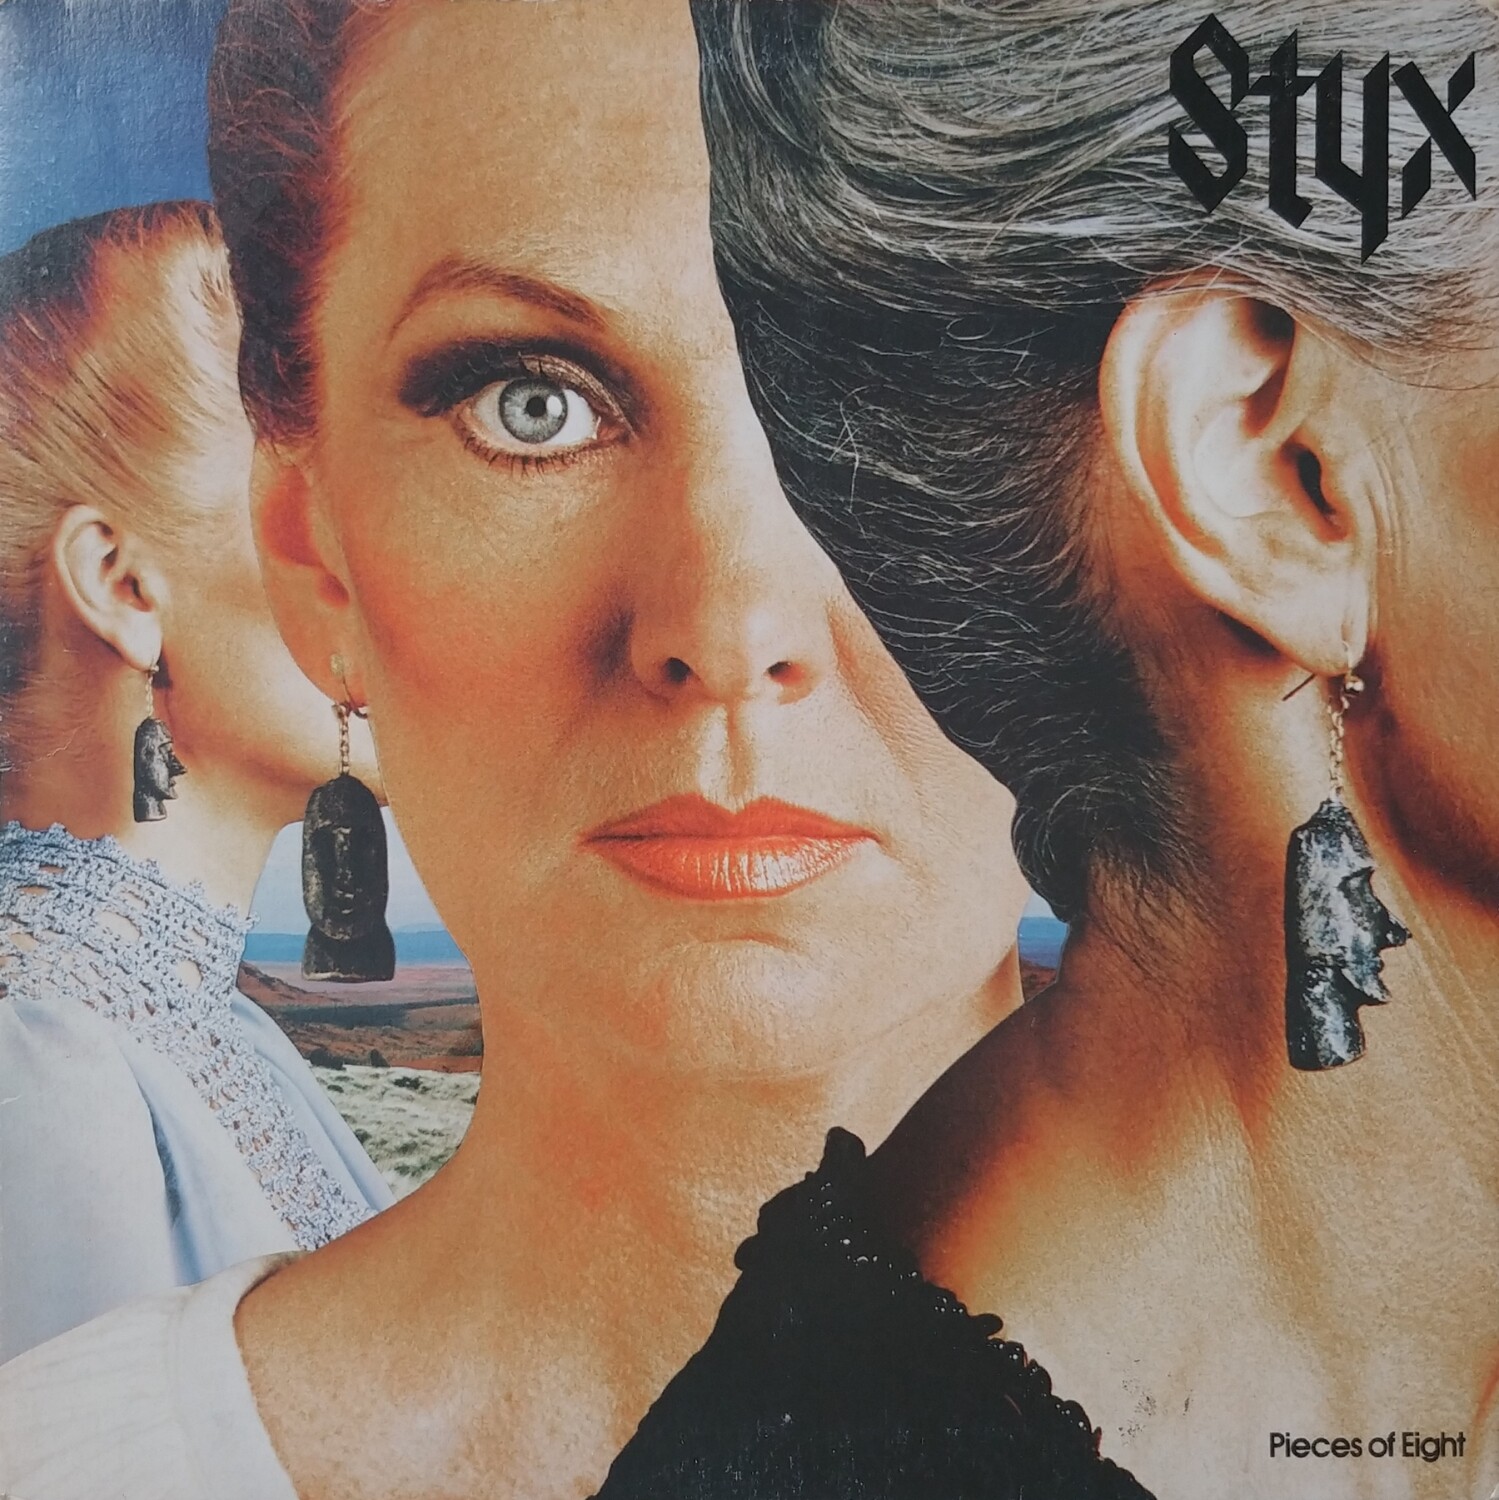 Styx - Pieces of Eight (Yellow)